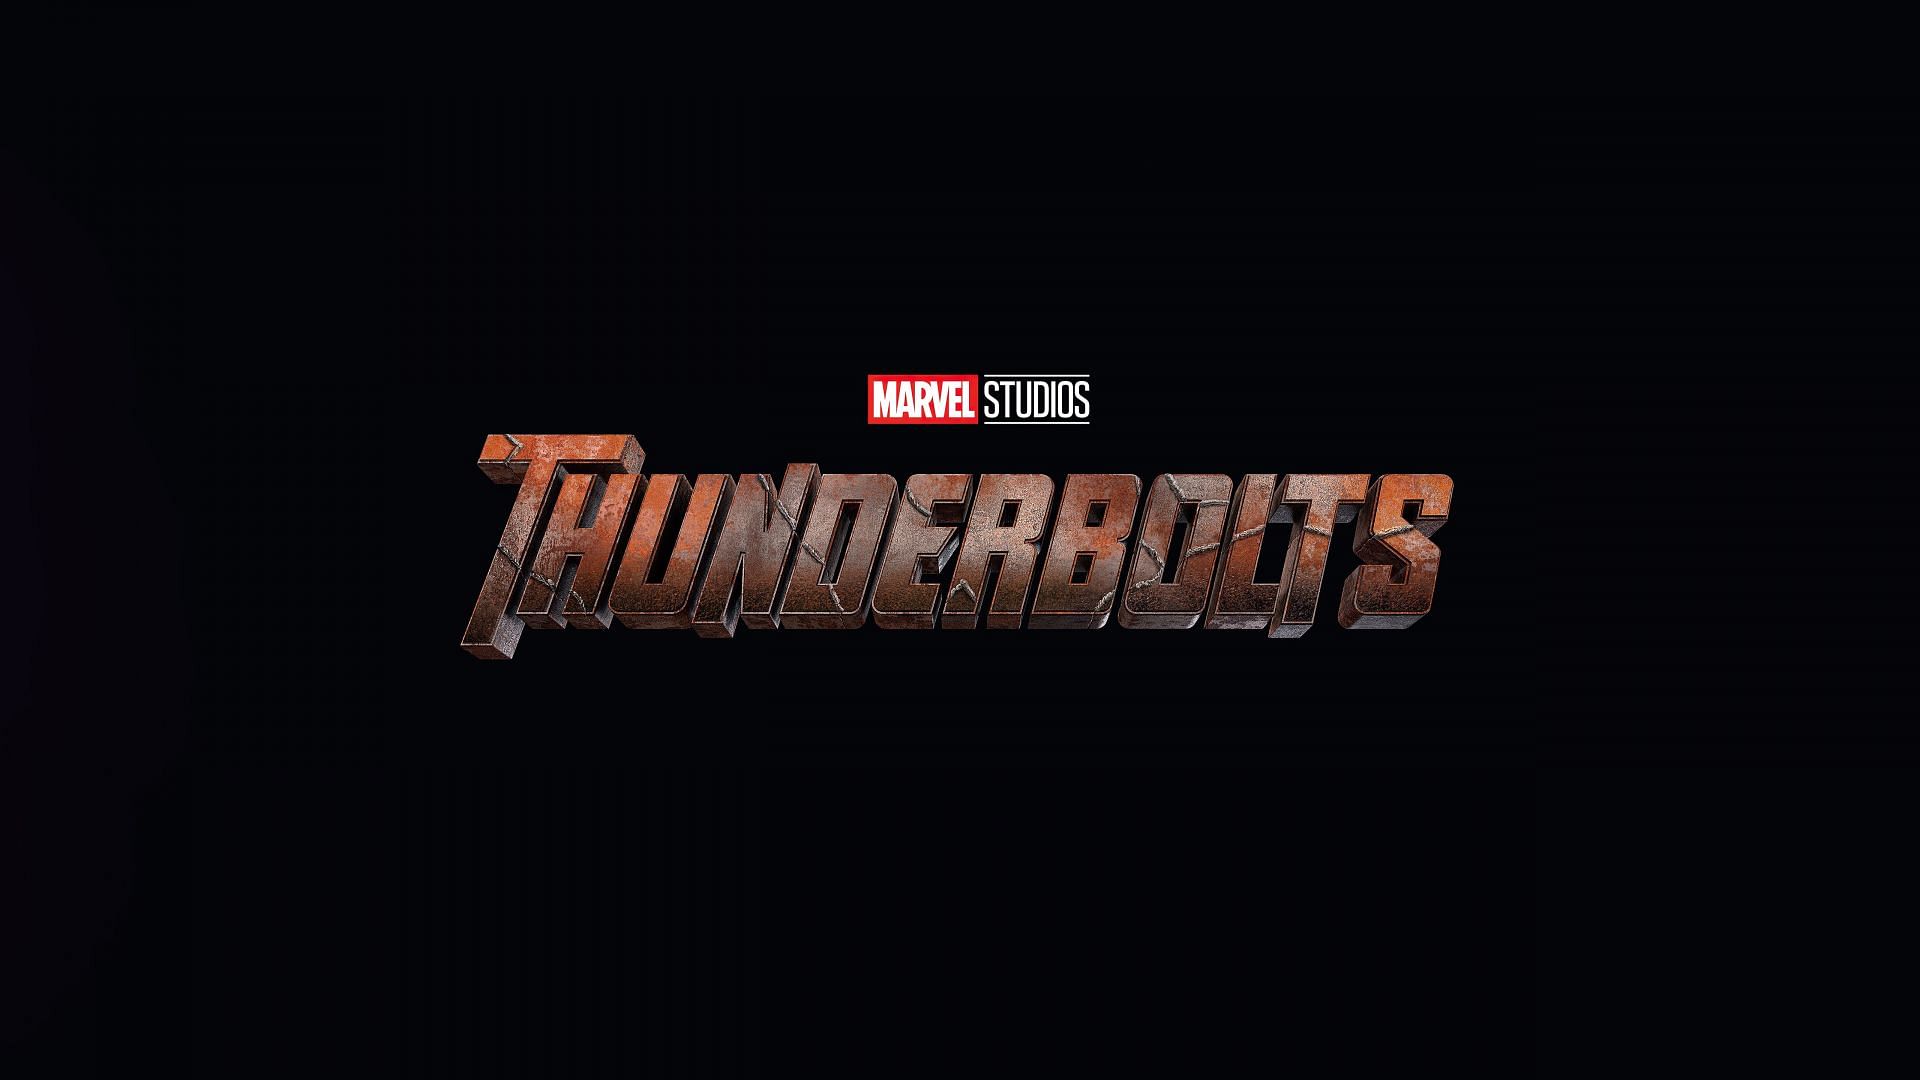 Thunderbolts consist of a group of Avengers, with a morally ambiguous nature. (Image via Marvel)